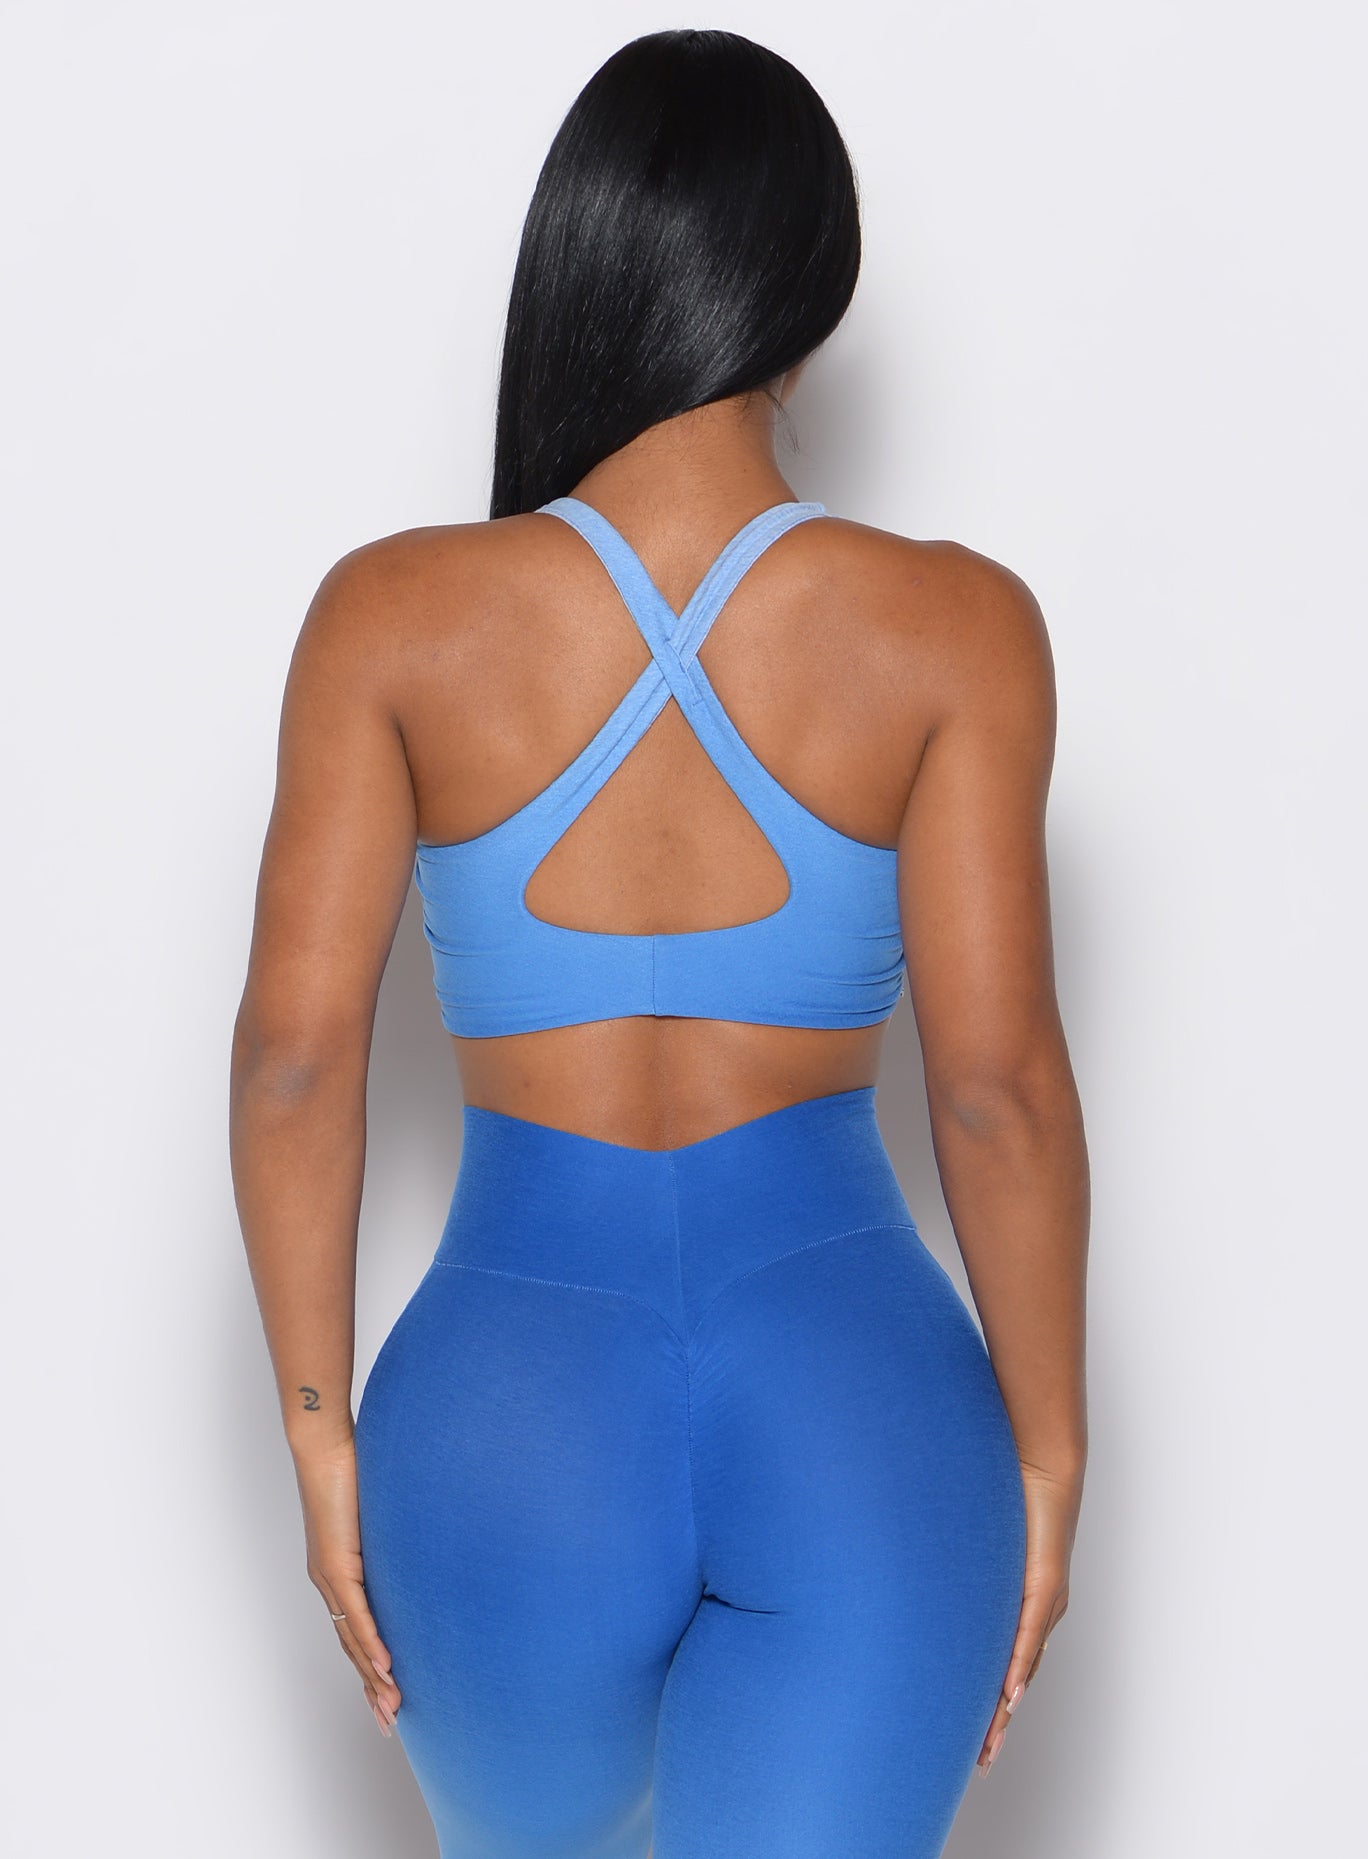 back profile view of a model wearing our toggle sports bra in Ombre Blue Crush color along with the matching leggings